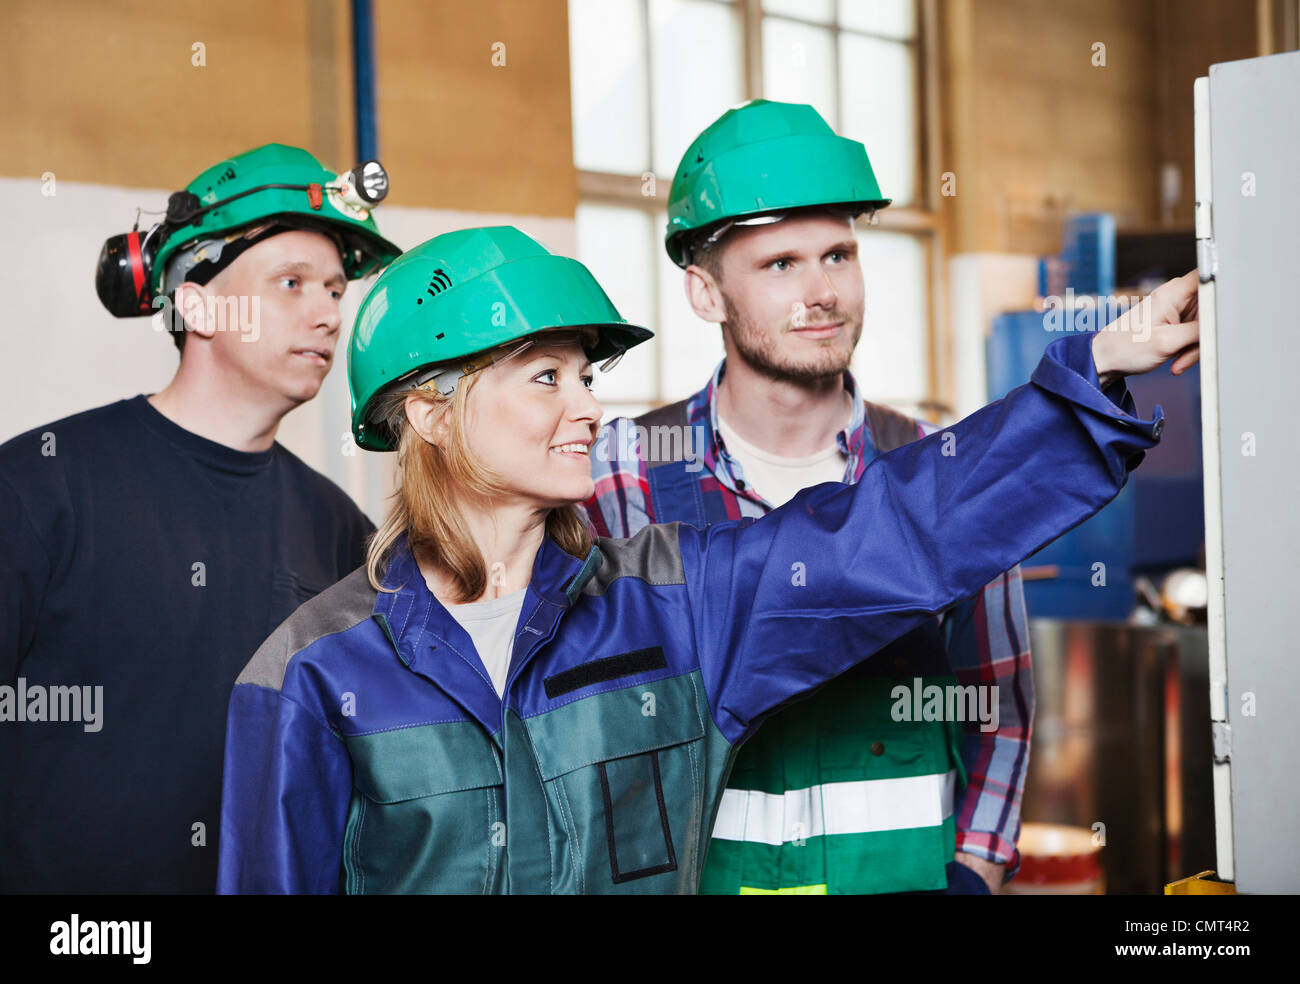 Colleagues at work Stock Photo